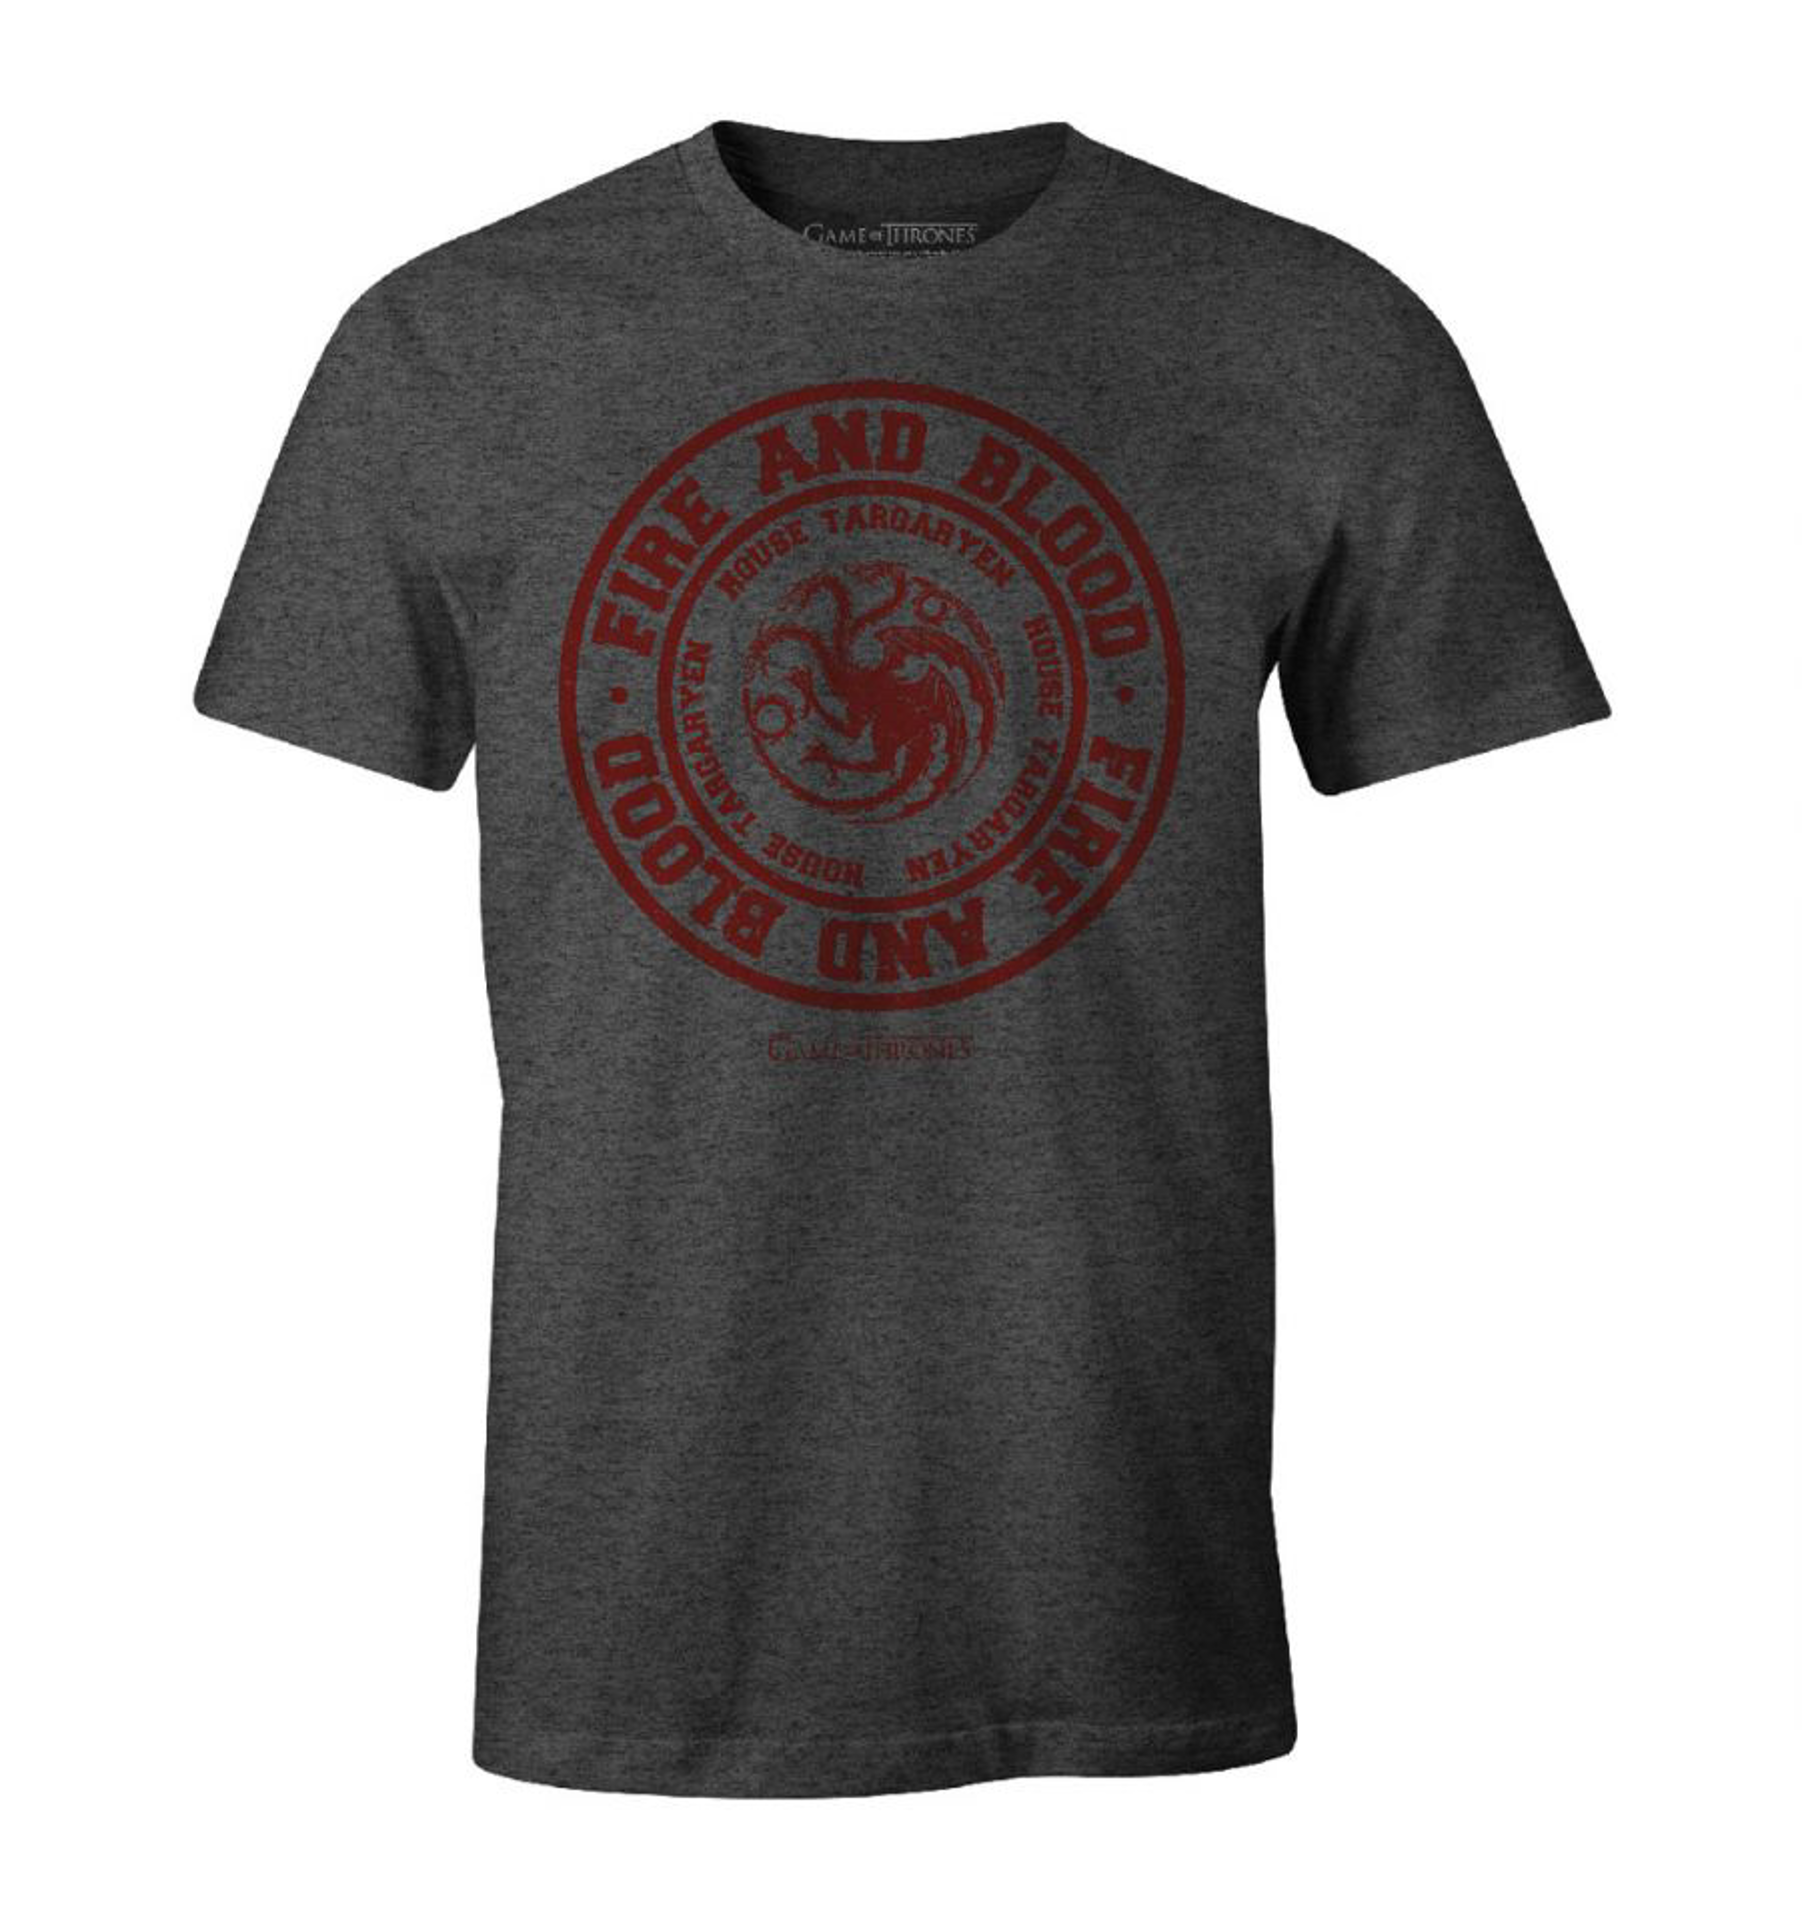 Game of Thrones - Fire and Blood Grey T-Shirt M